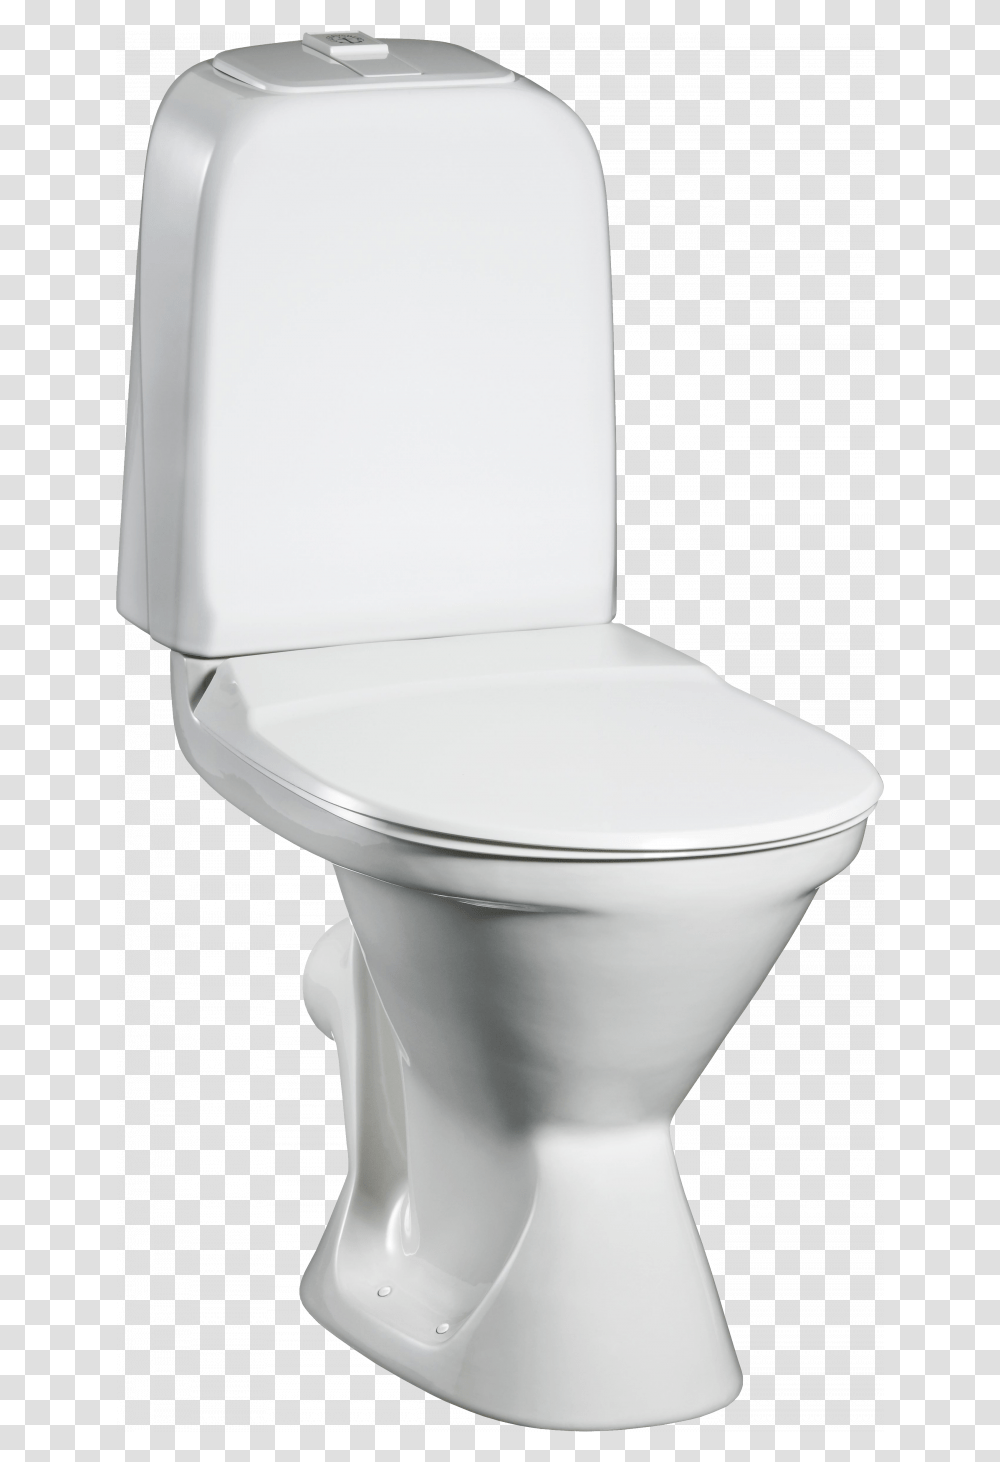 Now You Can Download Toilet Image Without Background Chair, Room, Indoors, Bathroom, Potty Transparent Png